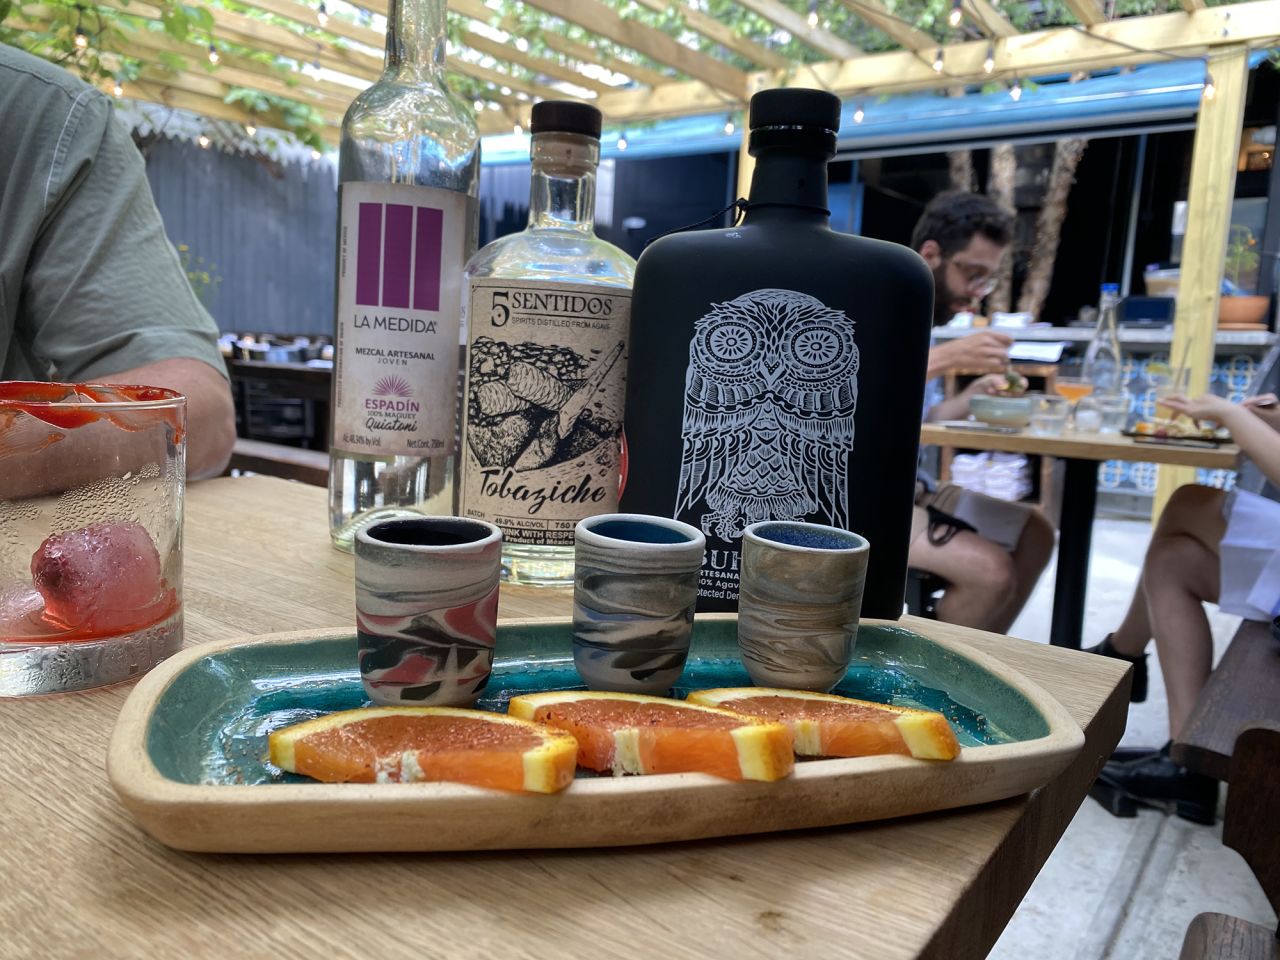 Claro's mezcal selection is impressive, and a flight is a good way to get acquainted with the spirit.